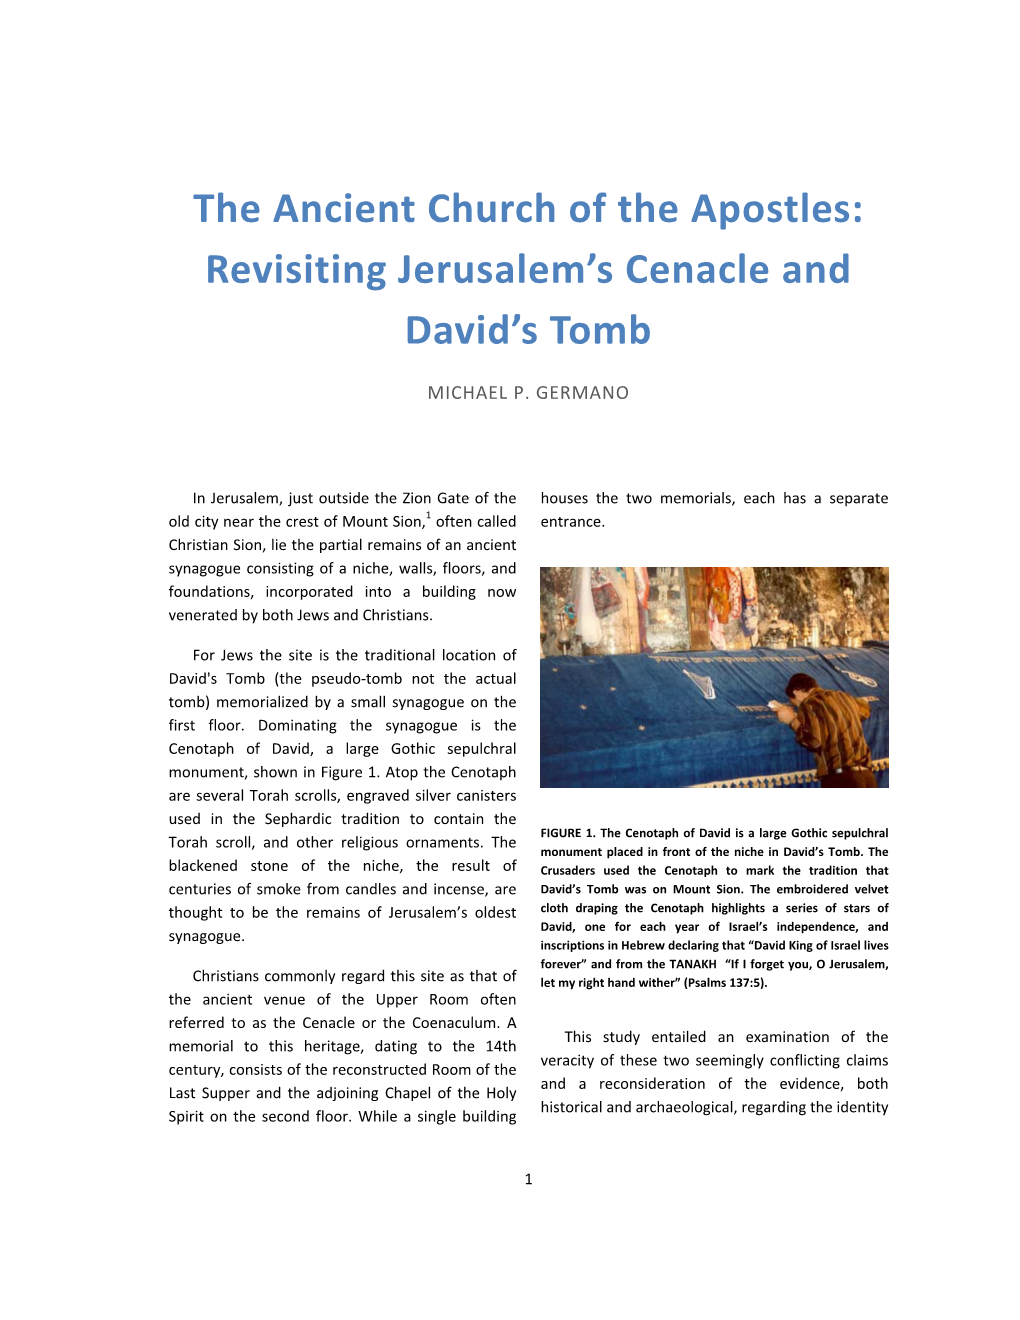 The Ancient Church of the Apostles: Revisiting Jerusalem's Cenacle And